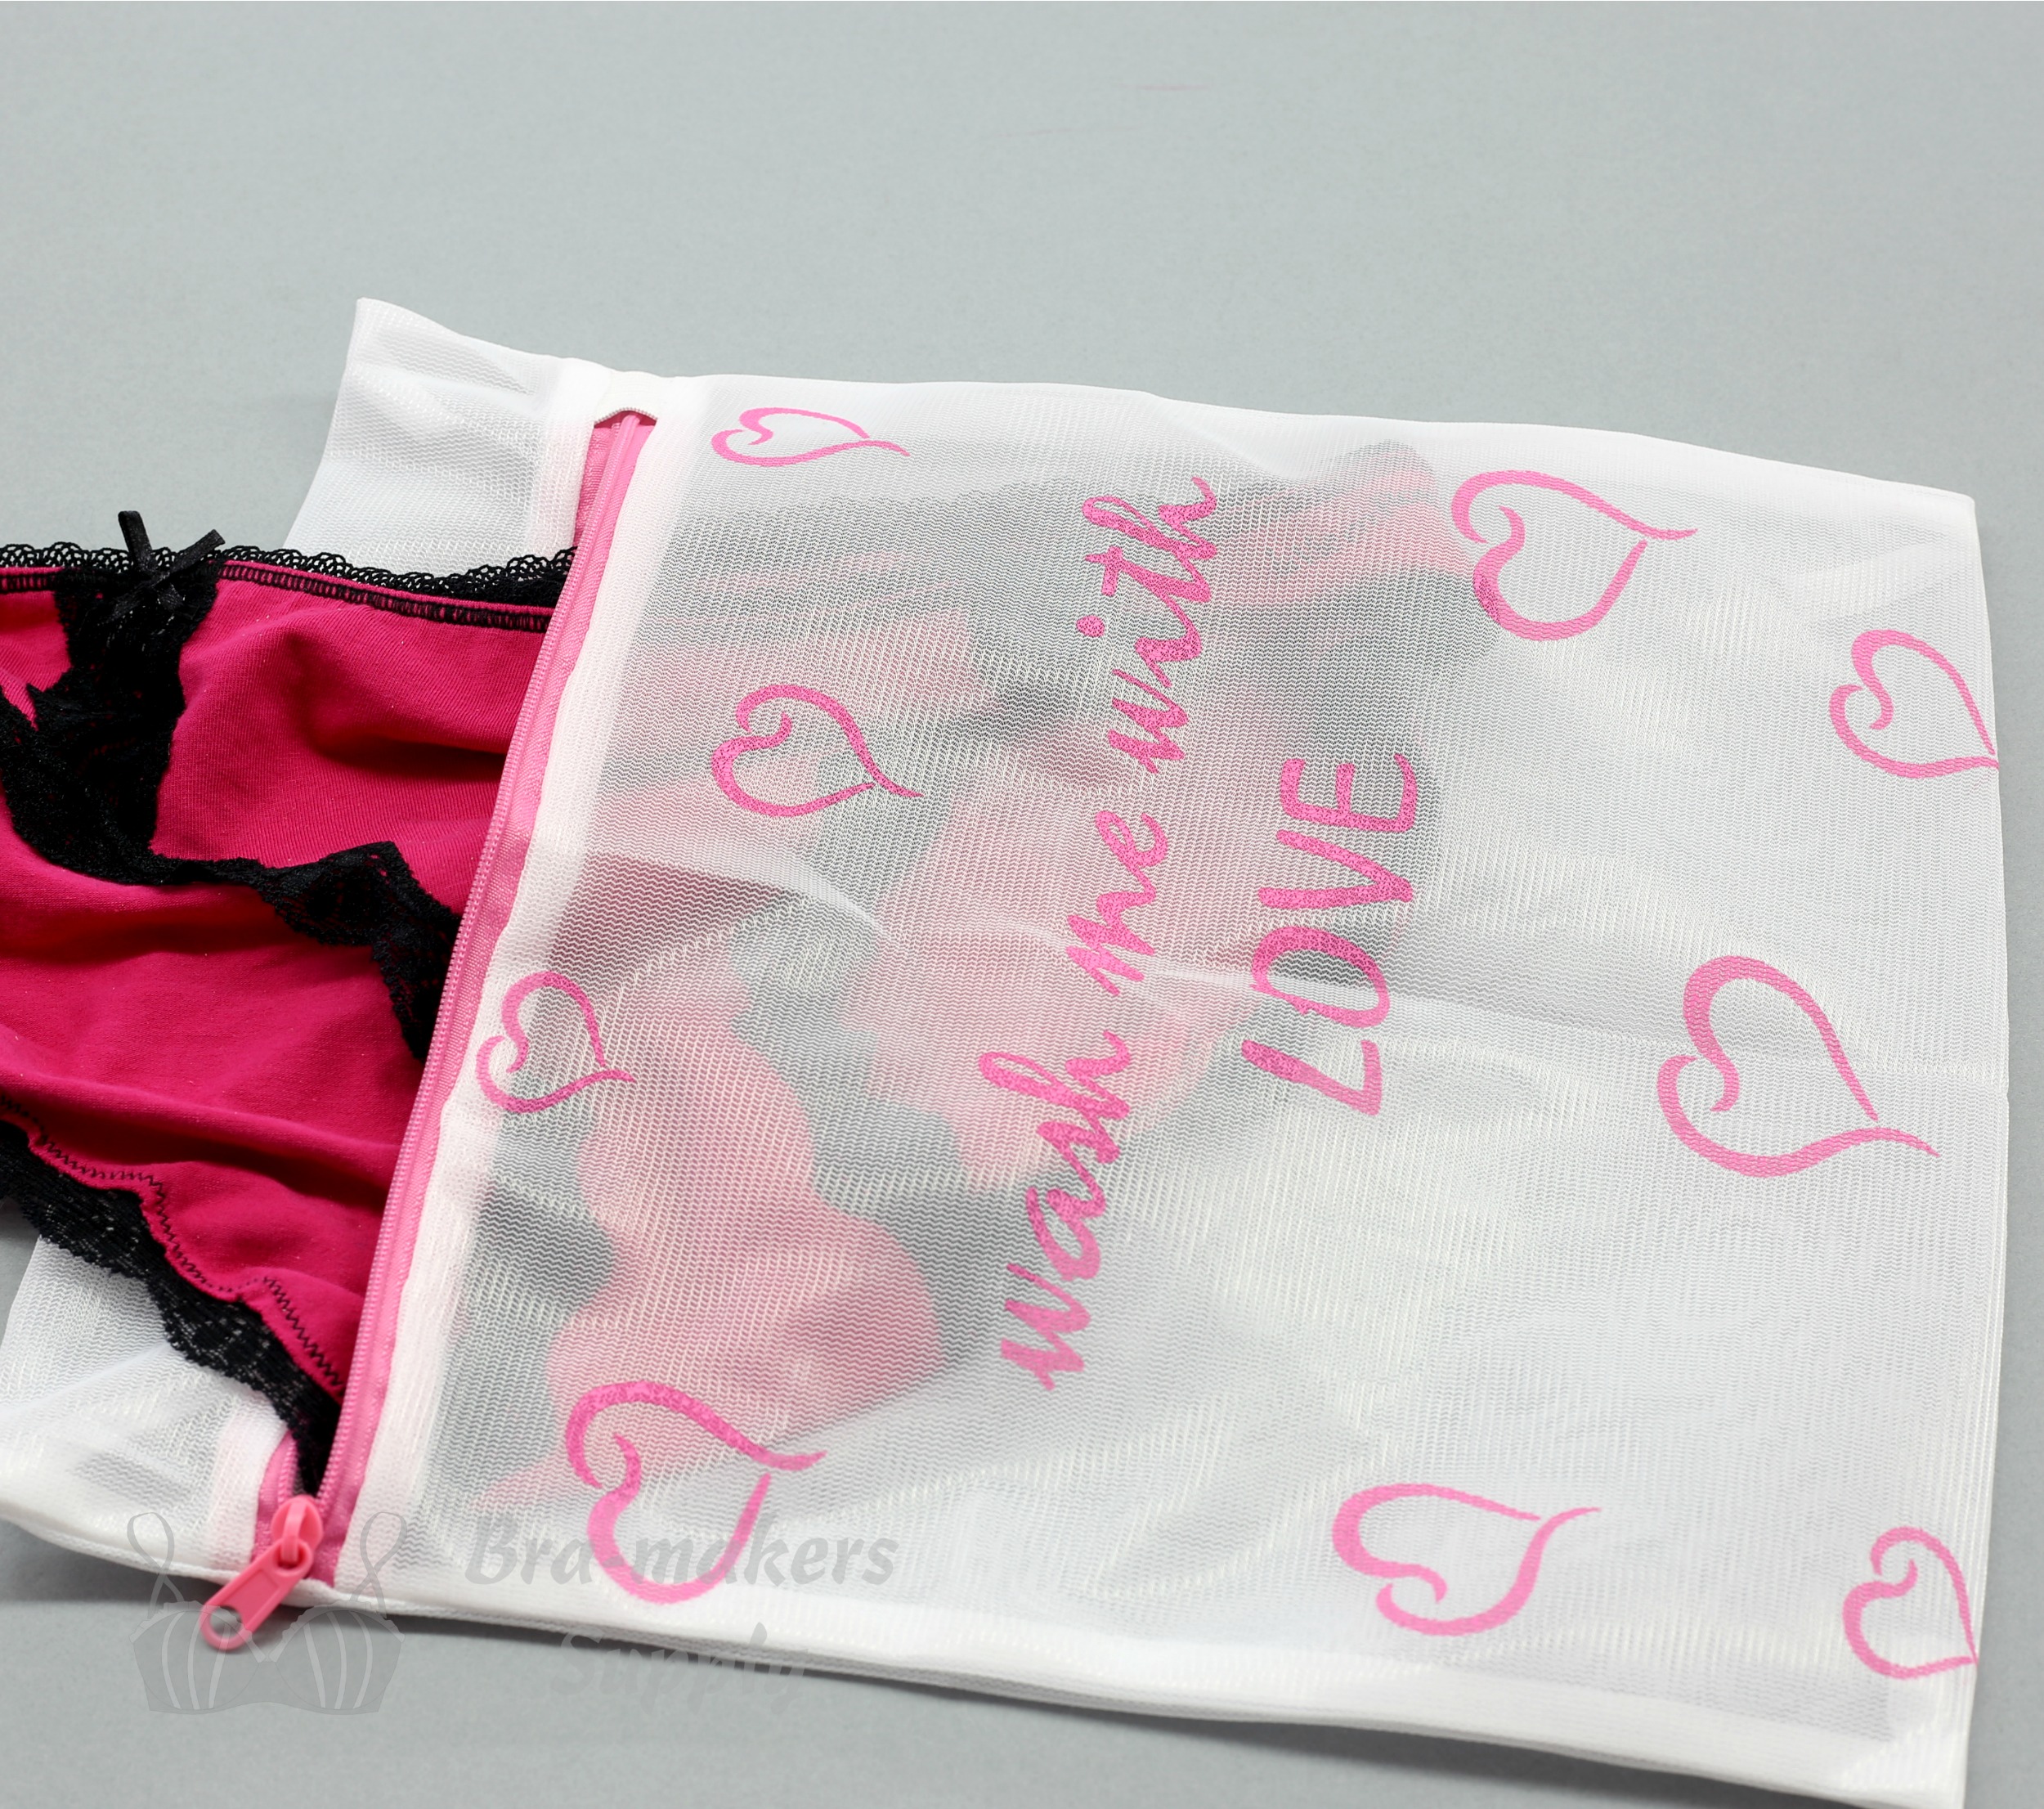 Bra Washing Bags Silicone Laundry Lingerie Bra Bag Without Zipper